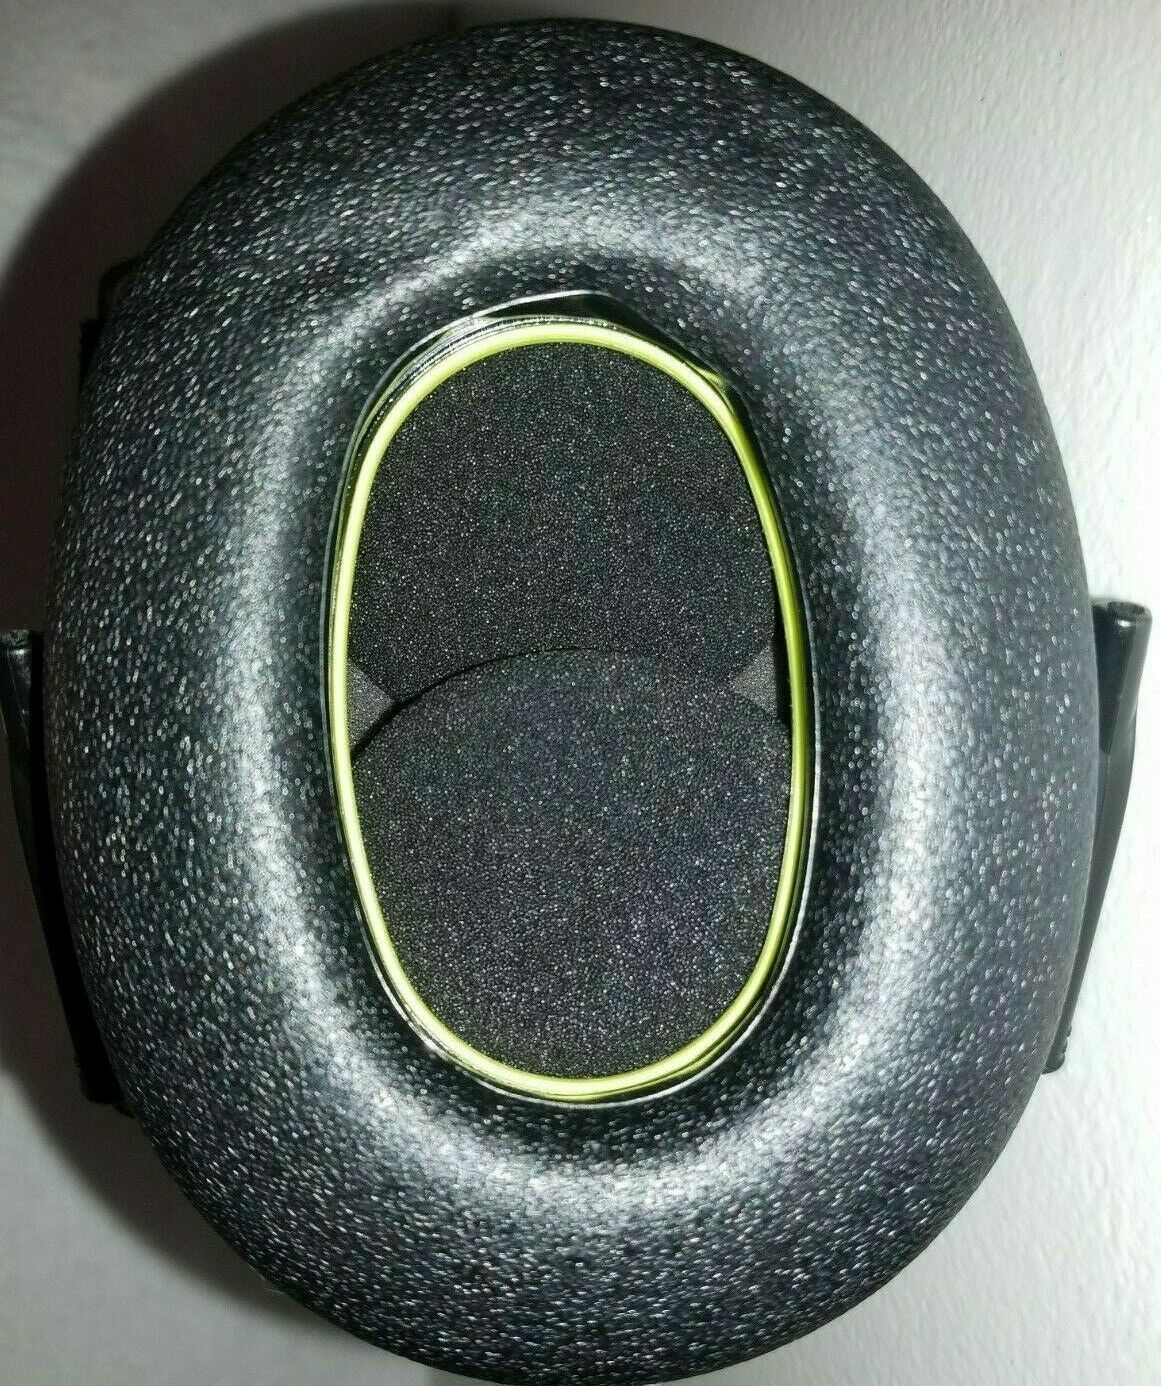 2E1 Sports Bluetooth Headset (with microphone)